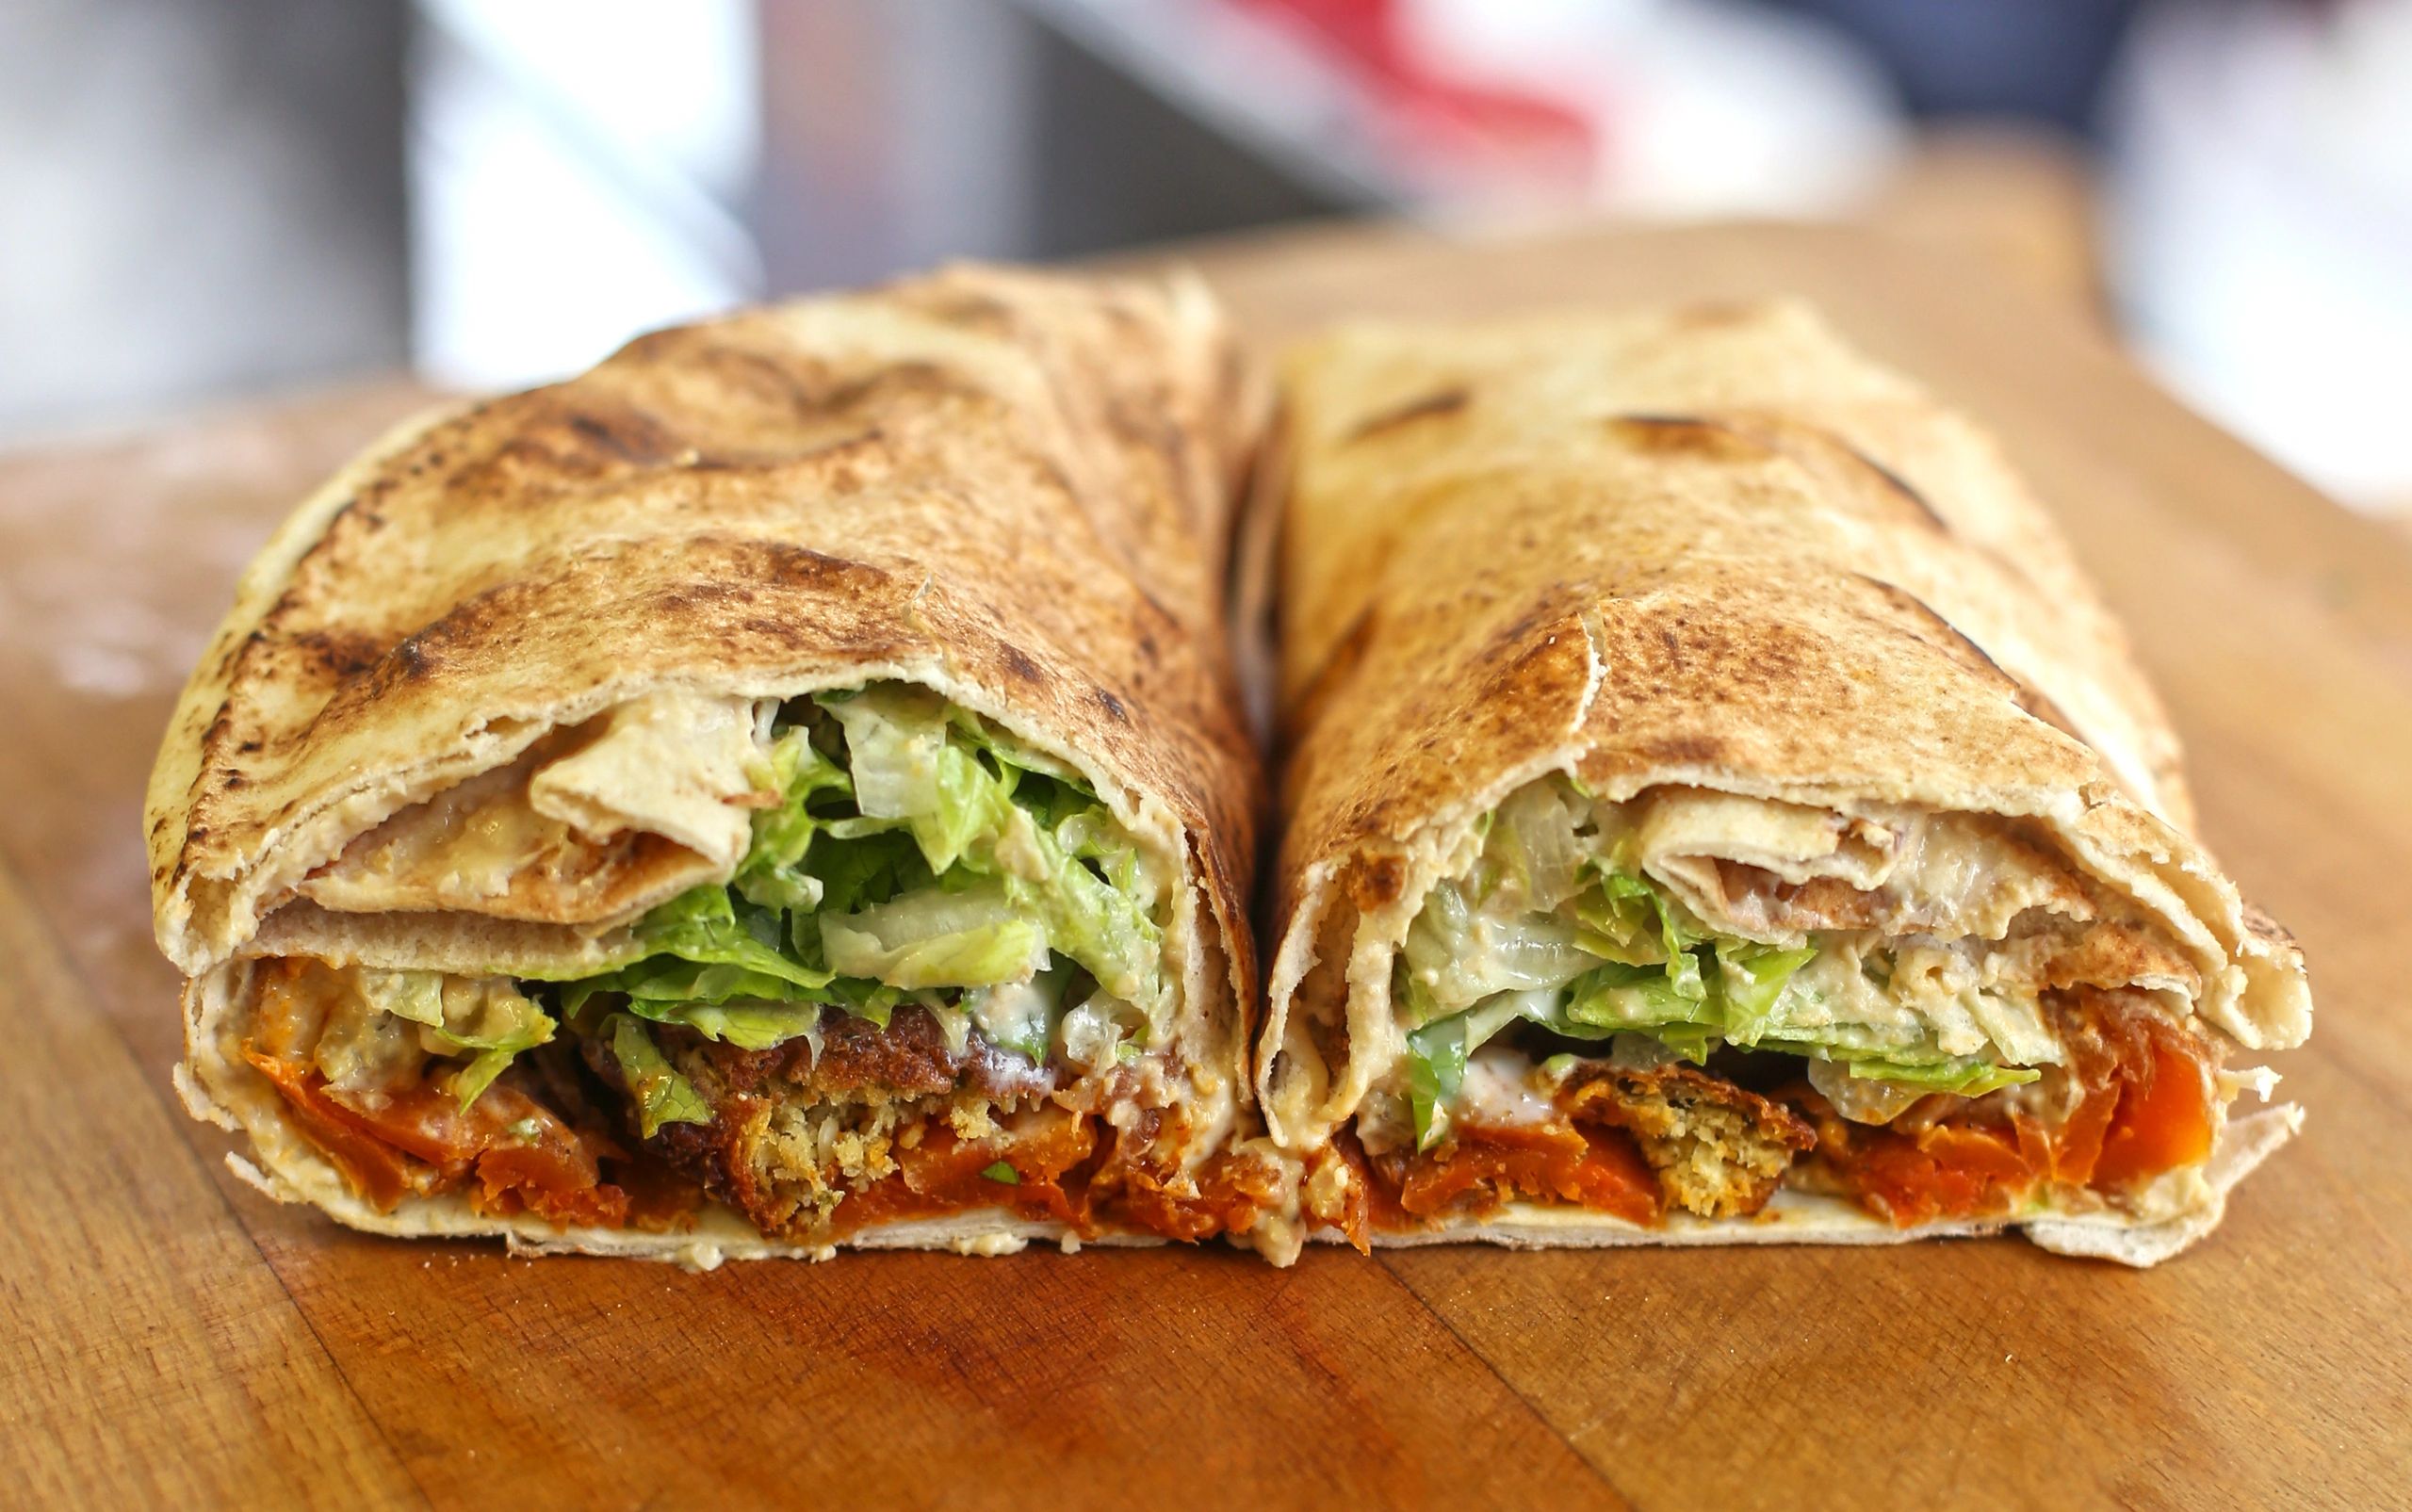 Hot Fiery wrap cut in half. Vegan street food on the go, for two!